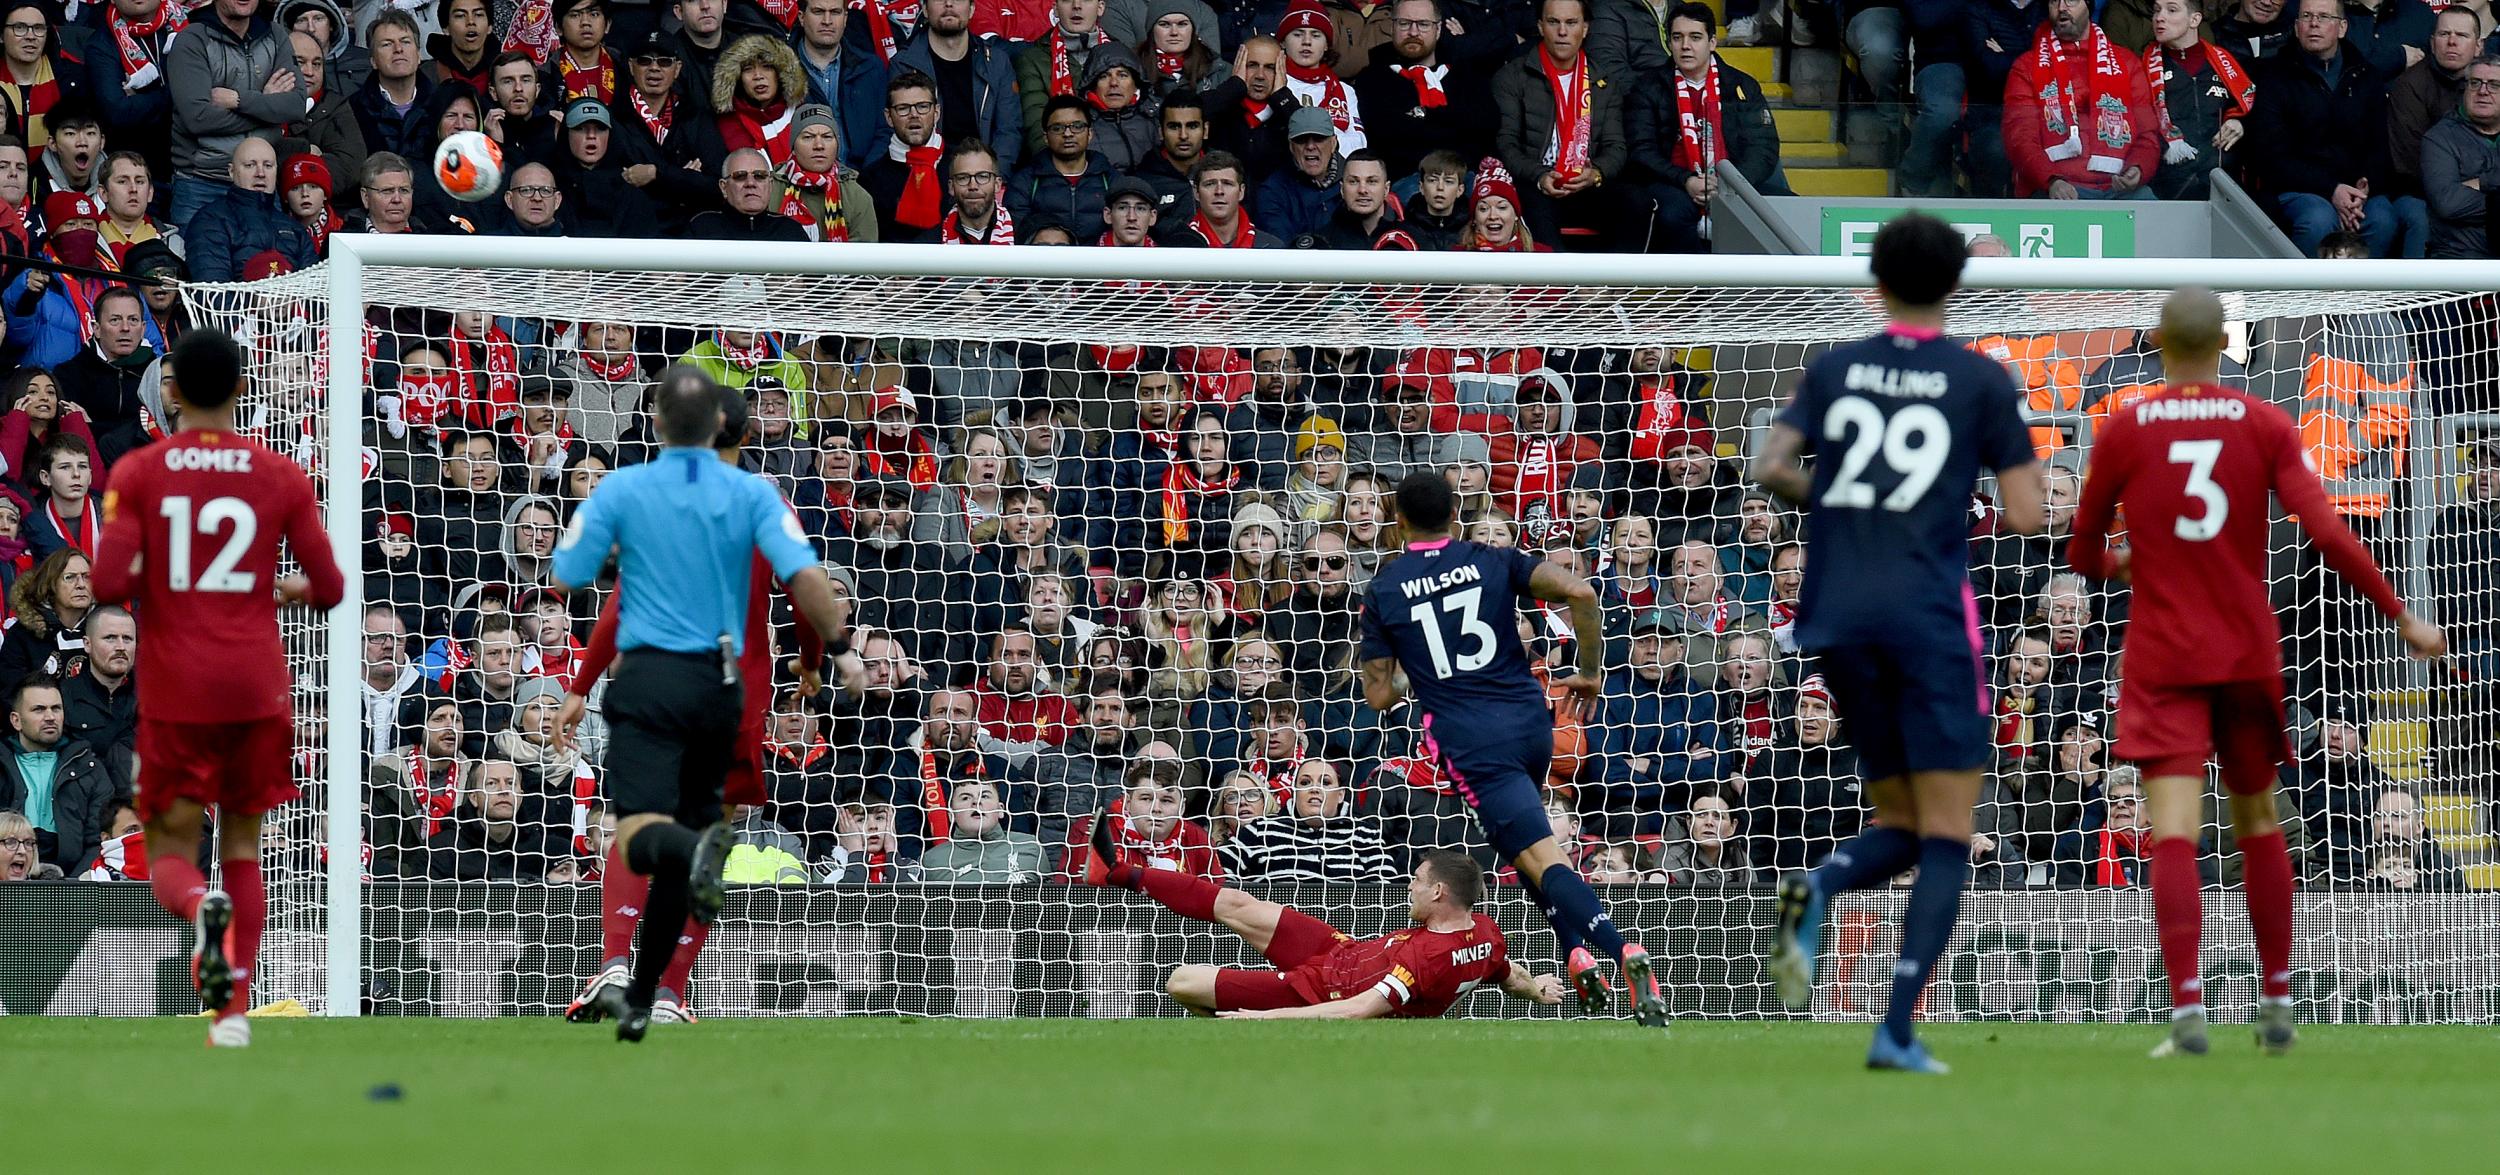 James Milner makes a goalline clearance against Bournemouth